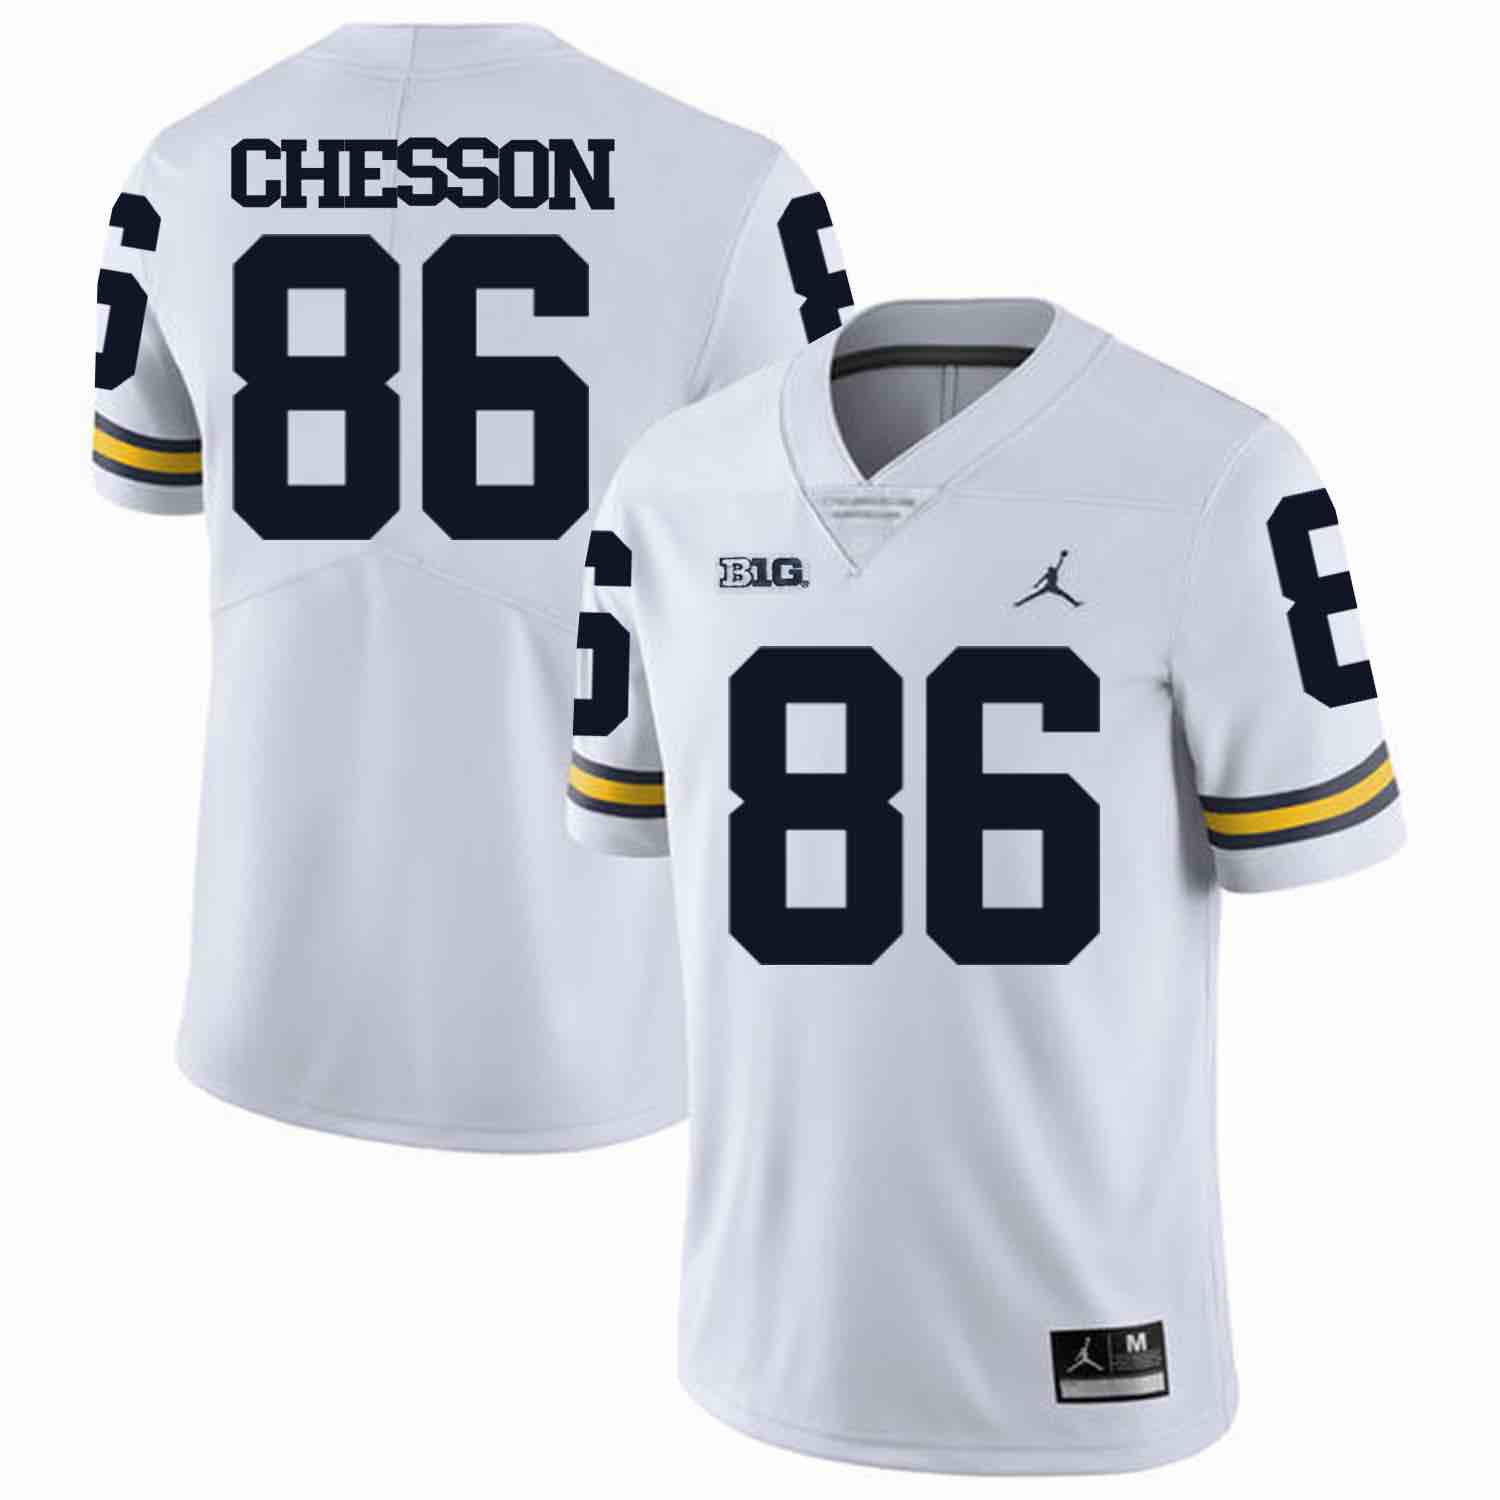 NCAA Michigan Wolverines #86 Chesson White Football Jersey